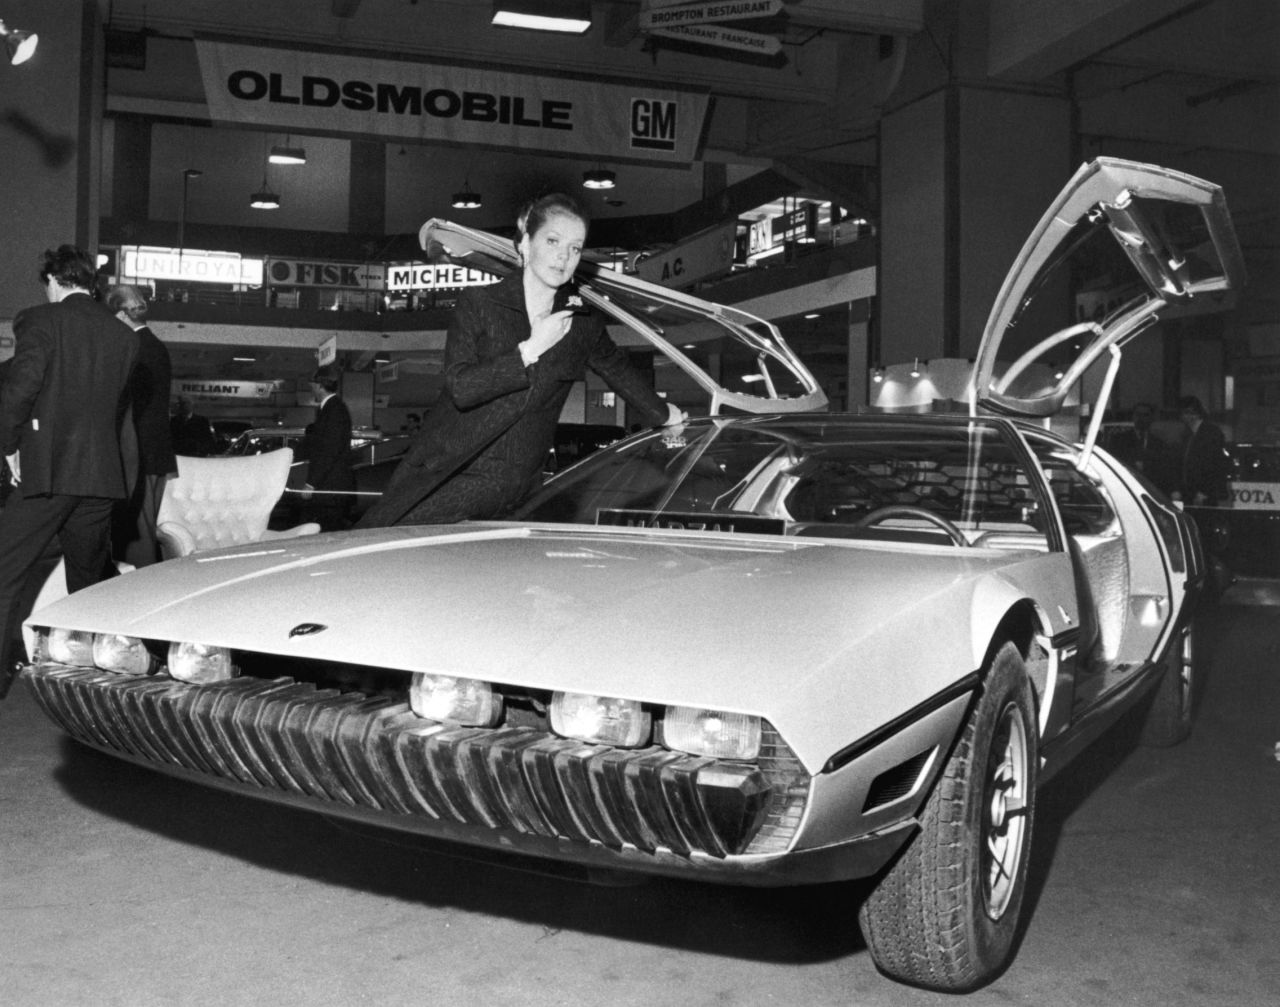 The Lamborghini Marzal, a one-off prototype concept car, designed by by Marcello Gandini of the Bertone design studio, at a preview of the London Motor Show at Earl's Court, 17th October 1967. (Photo by Mike McLaren/Central Press/Hulton Archive/Getty Images)